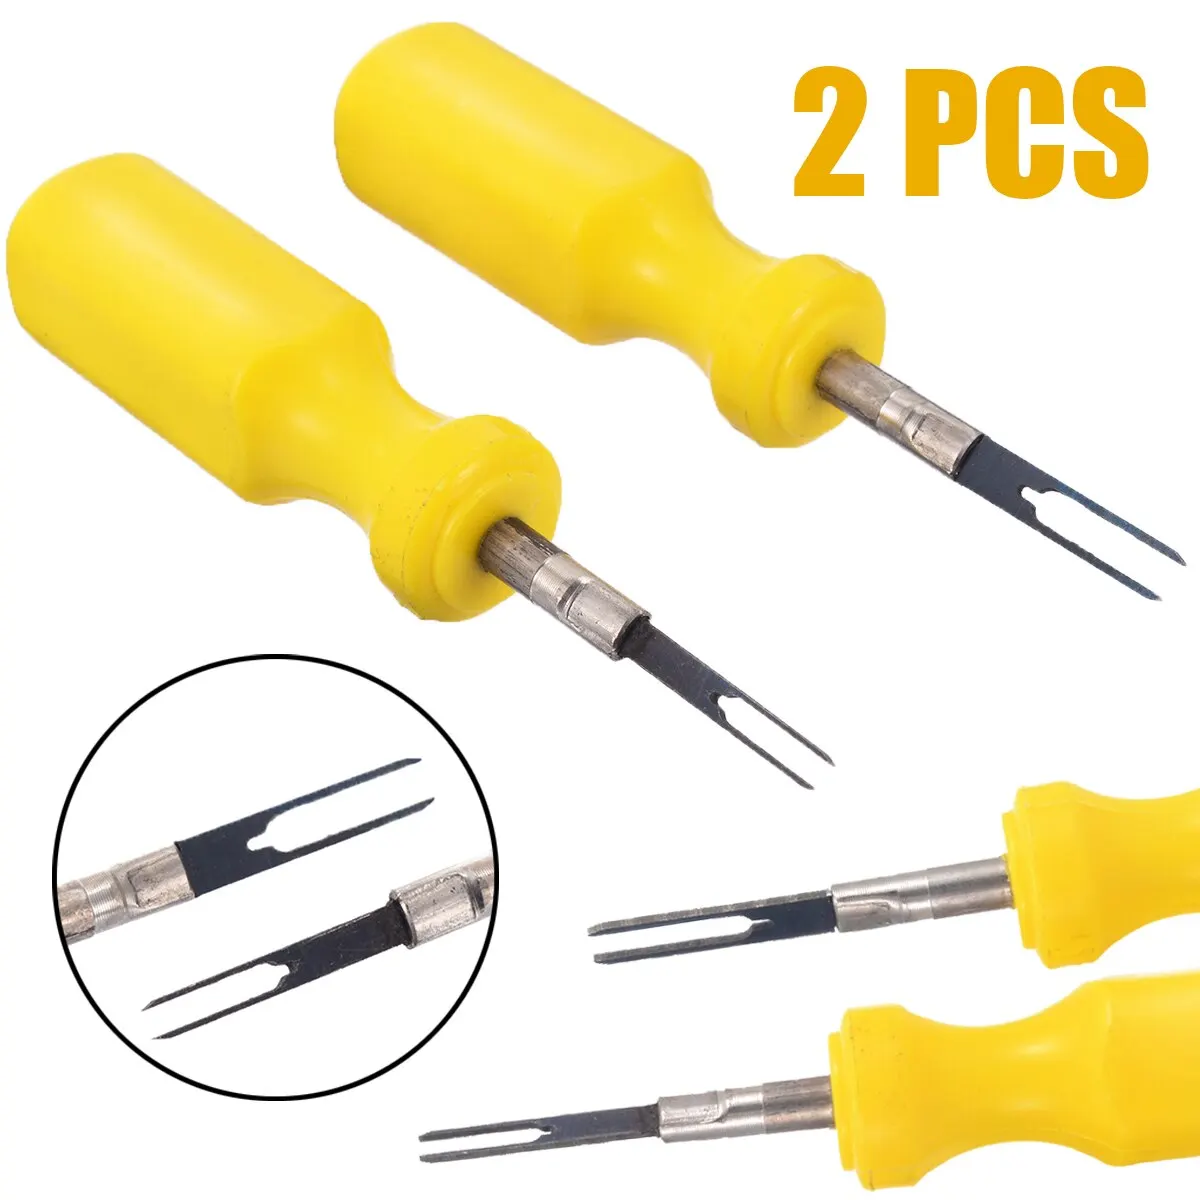 2PCS 3mm + 2mm Car Wiring Connector Pin Release Extractor Puller Auto Terminal Removal Tool with Plastic Handle Kit For Audi